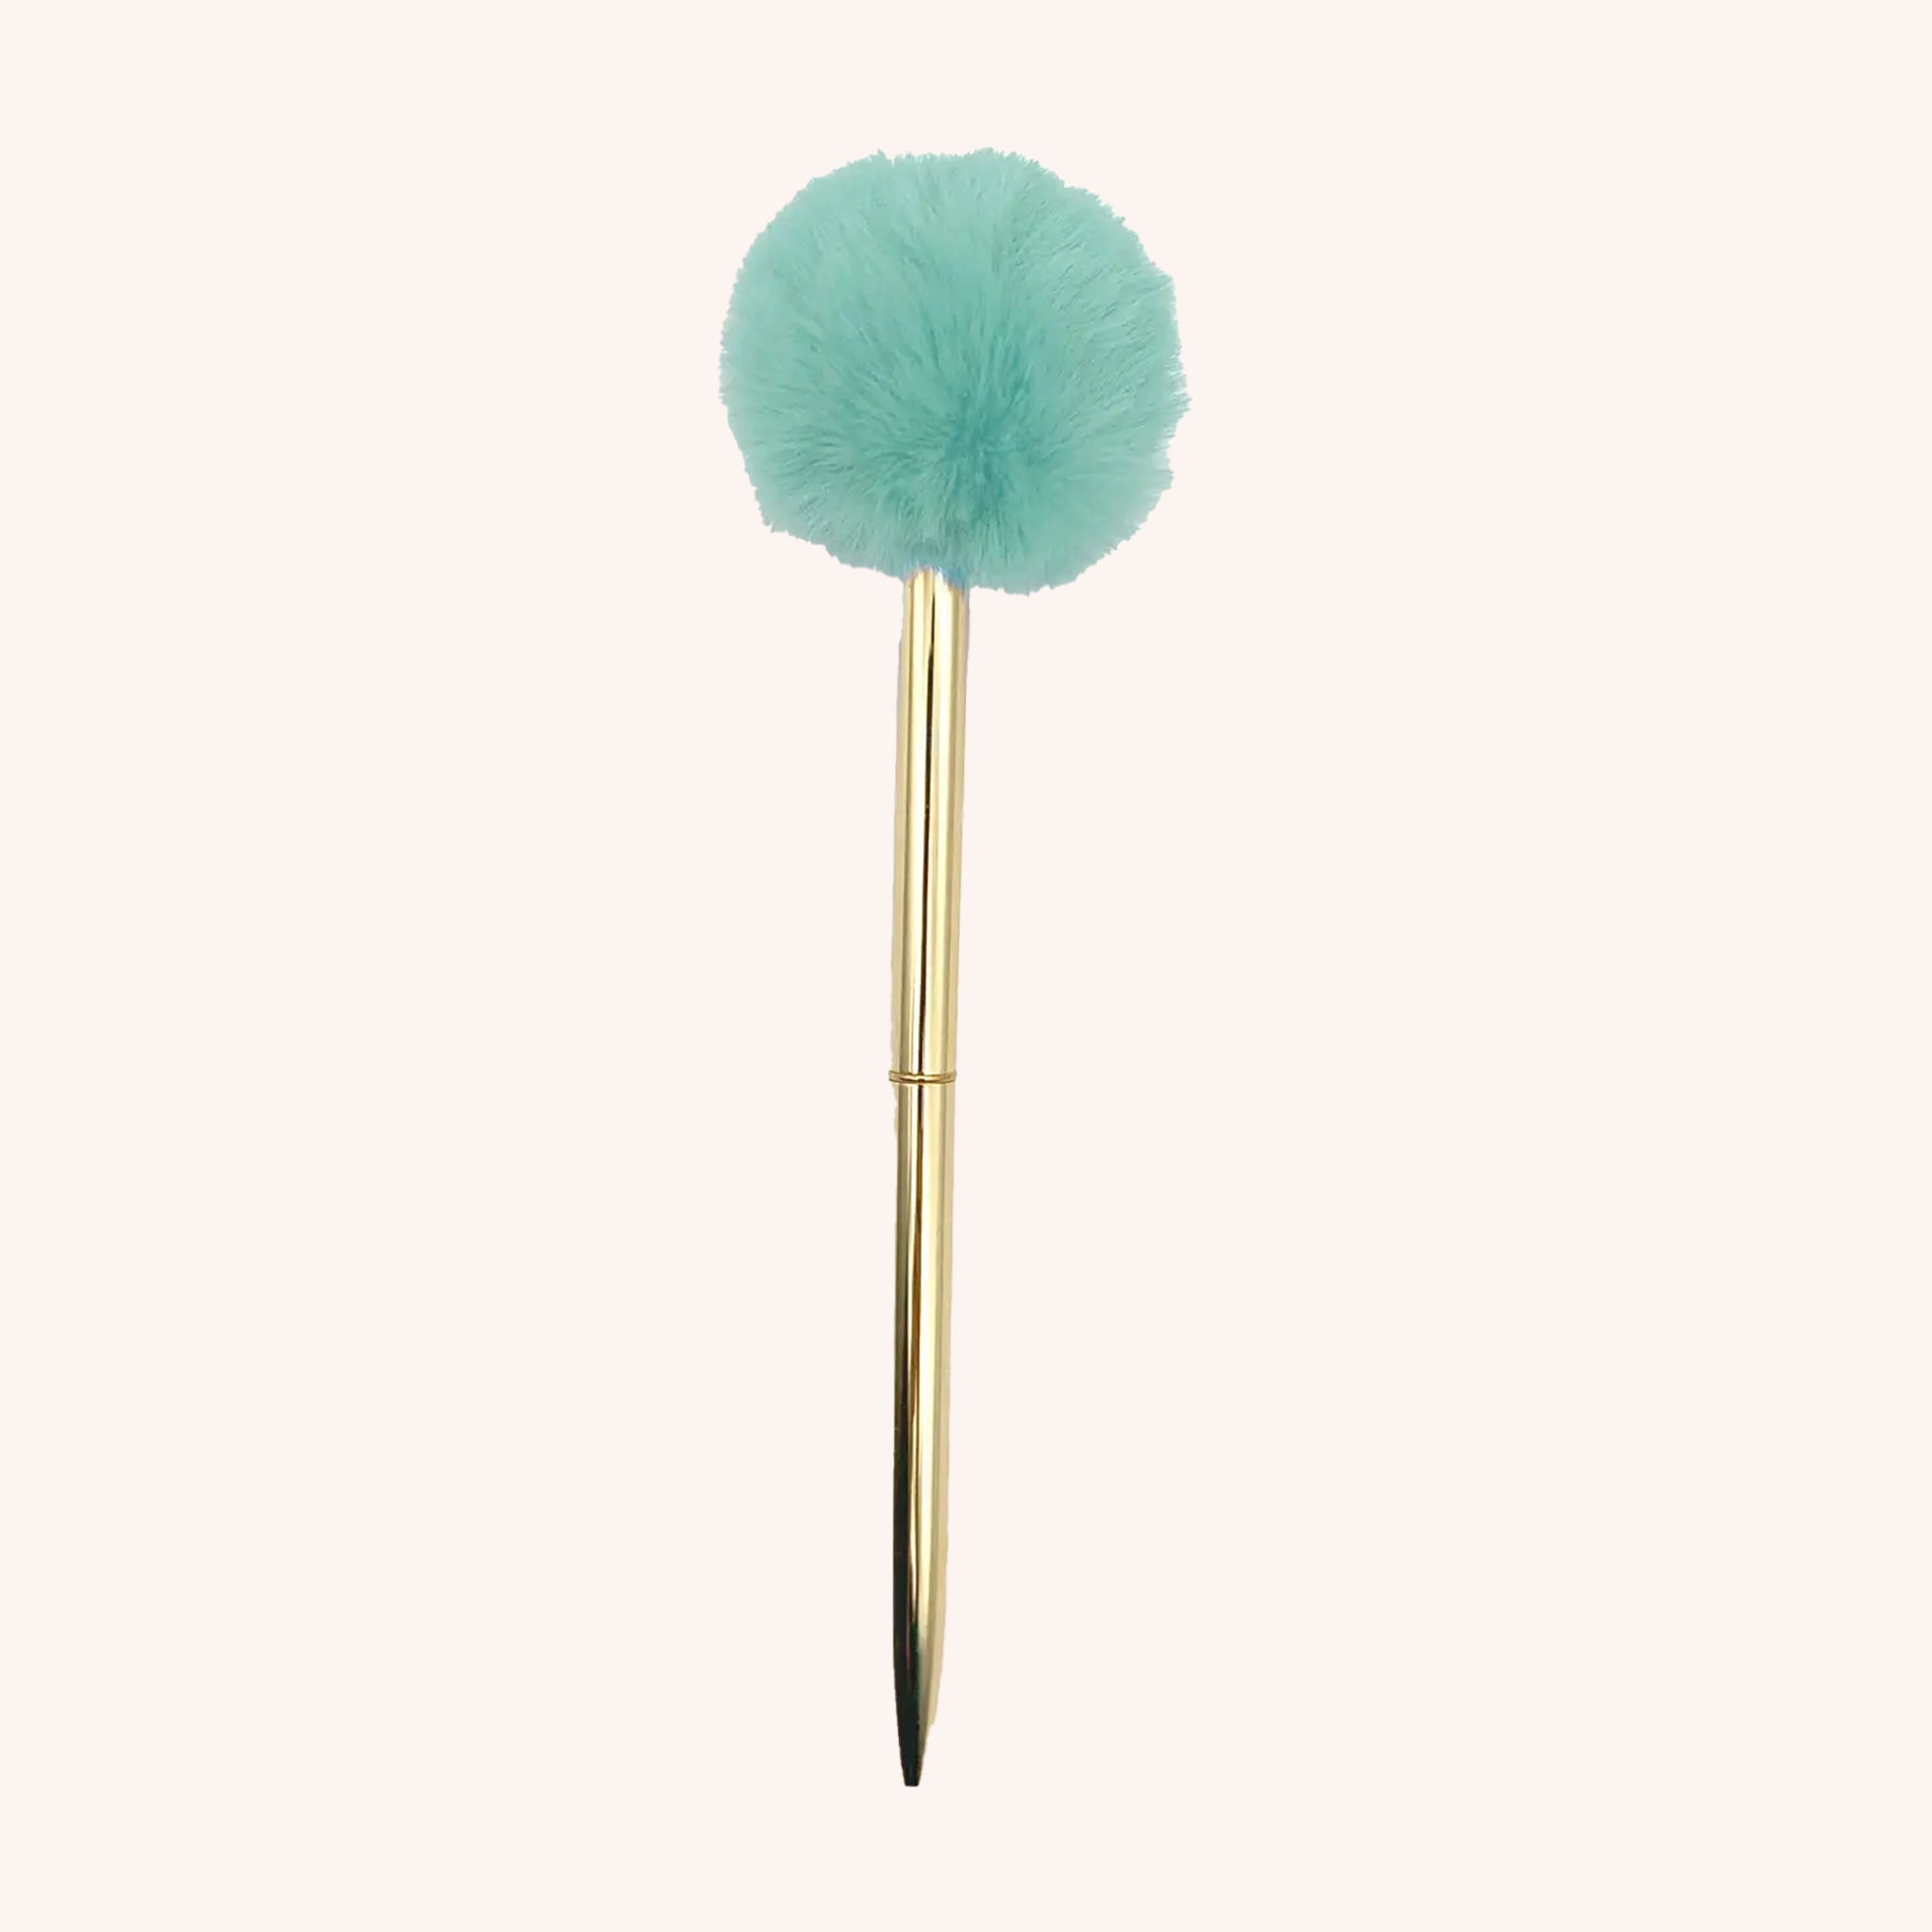 A thin gold pen with a fluffy mint green pom pom at the end. 